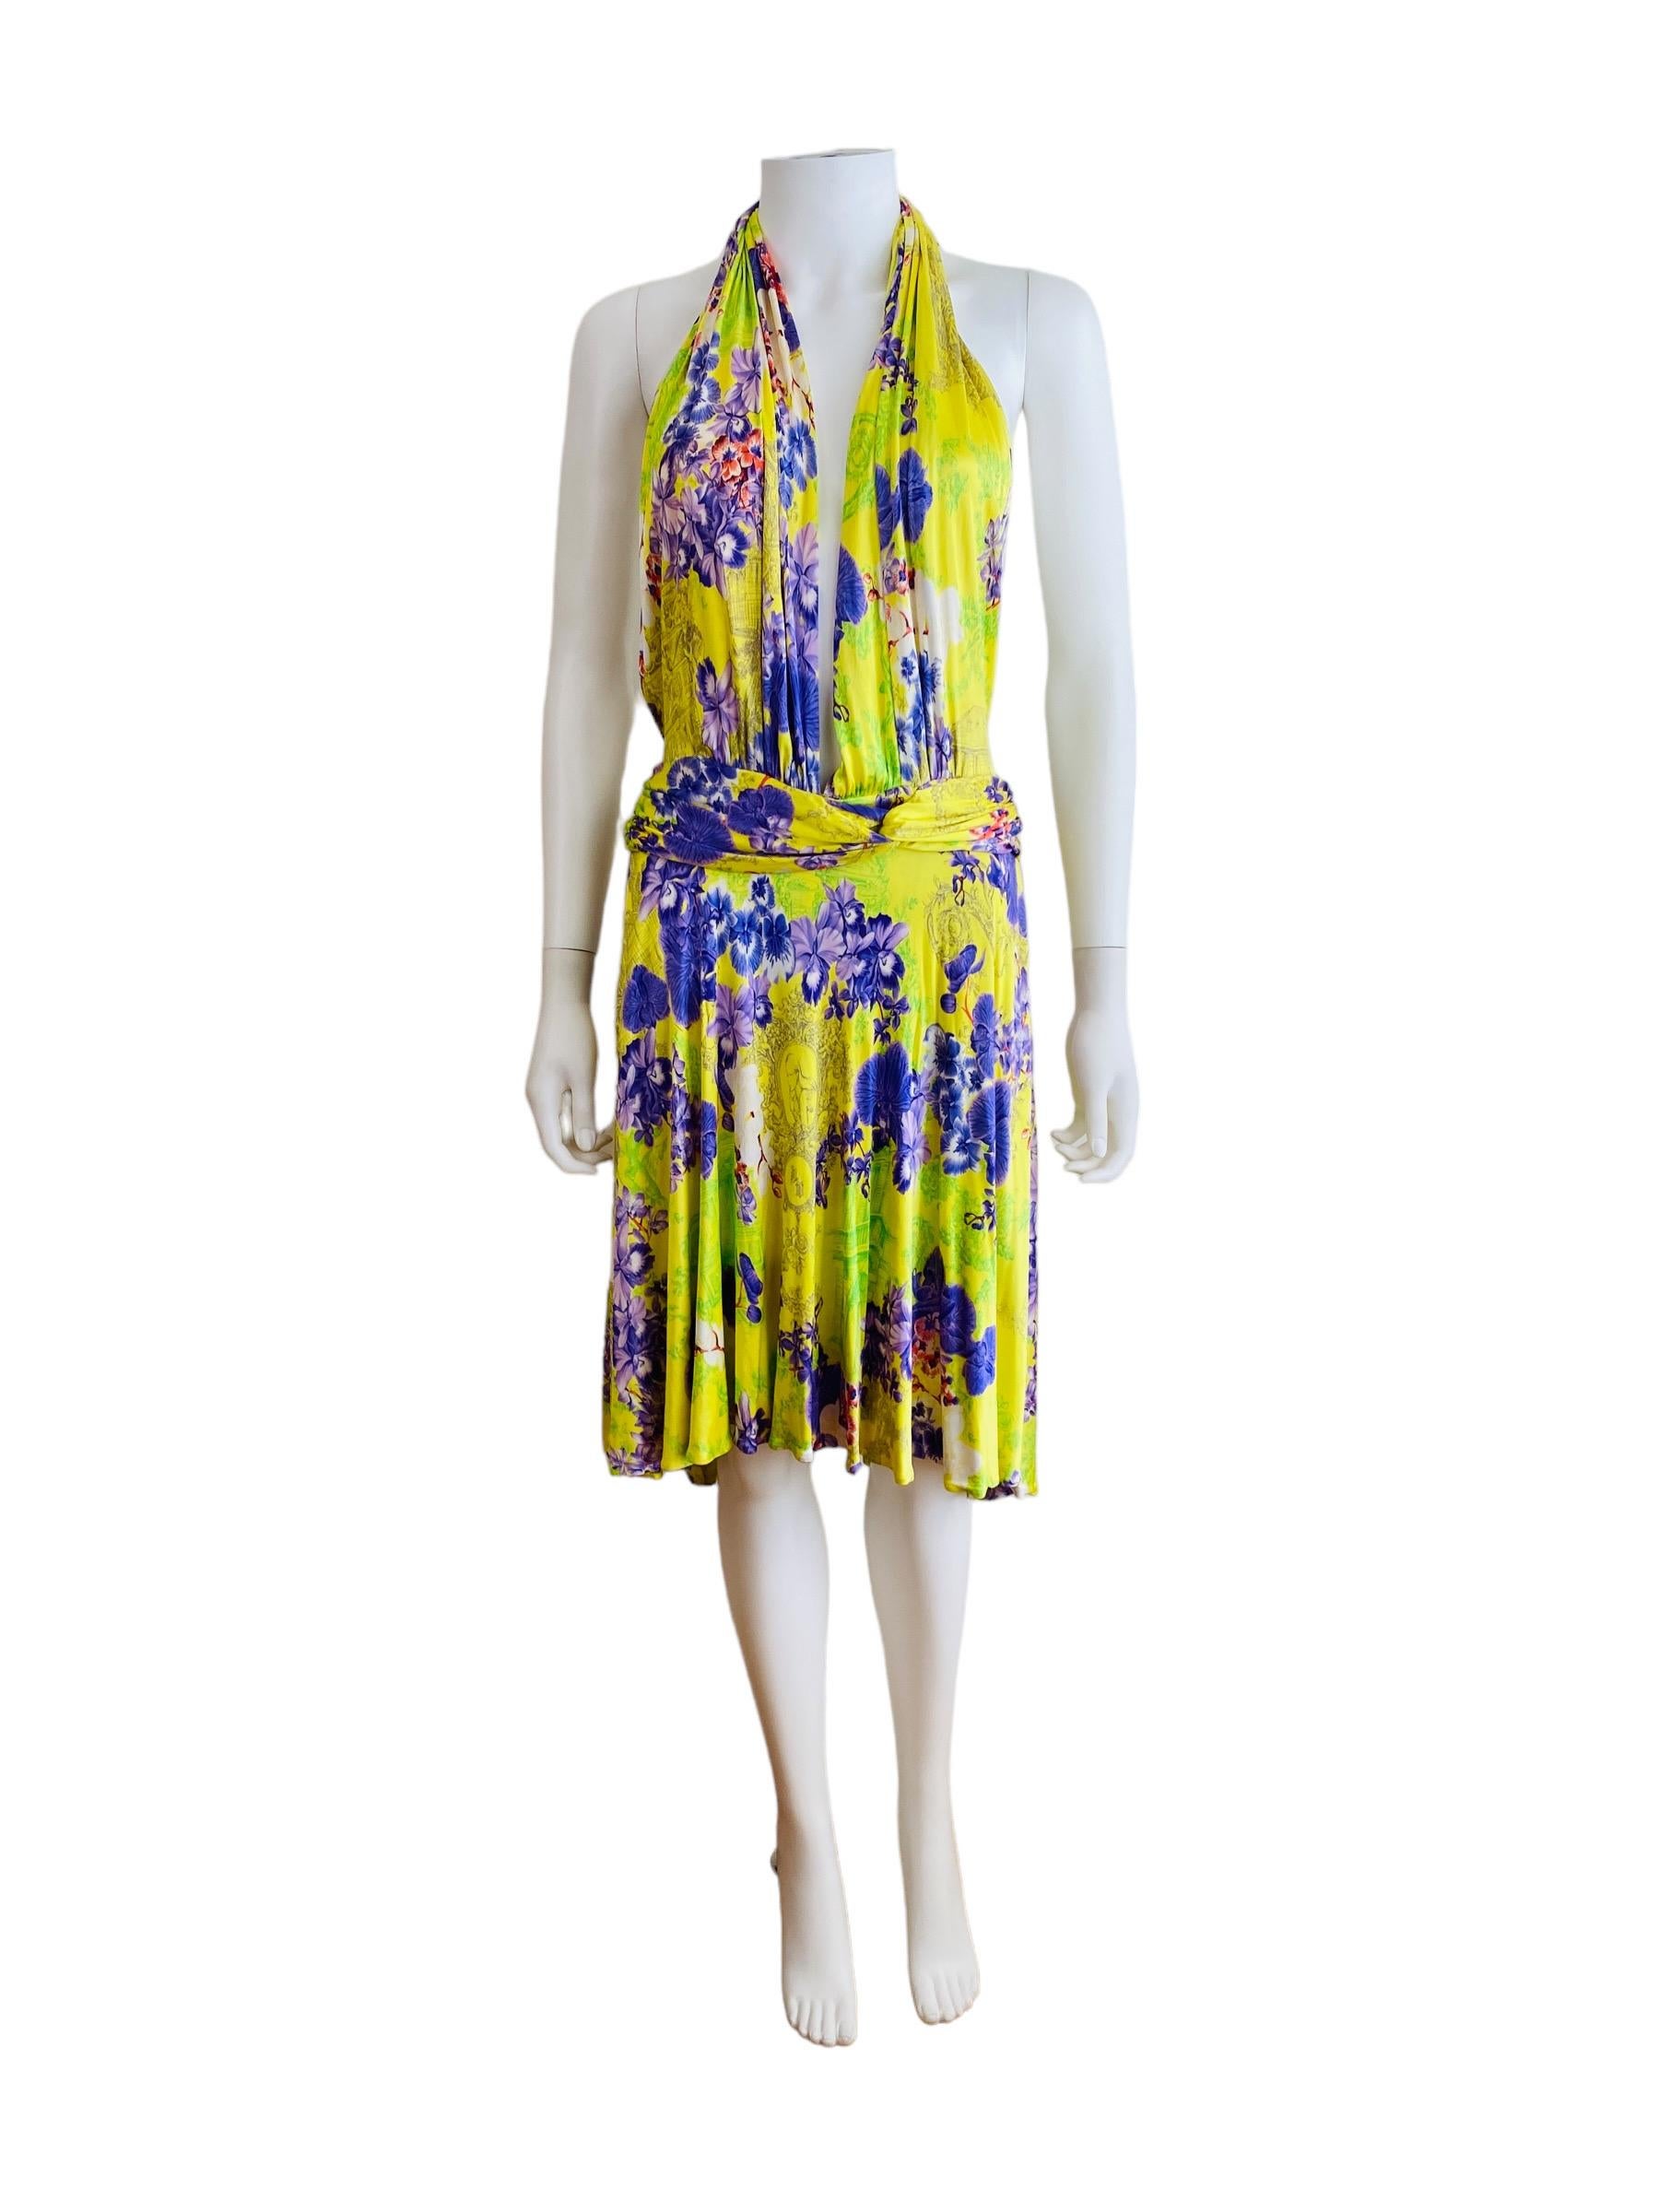 Vintage S/S 2004 Versace Dress Bright Yellow + Purple Orchid Floral Runway For Sale 3